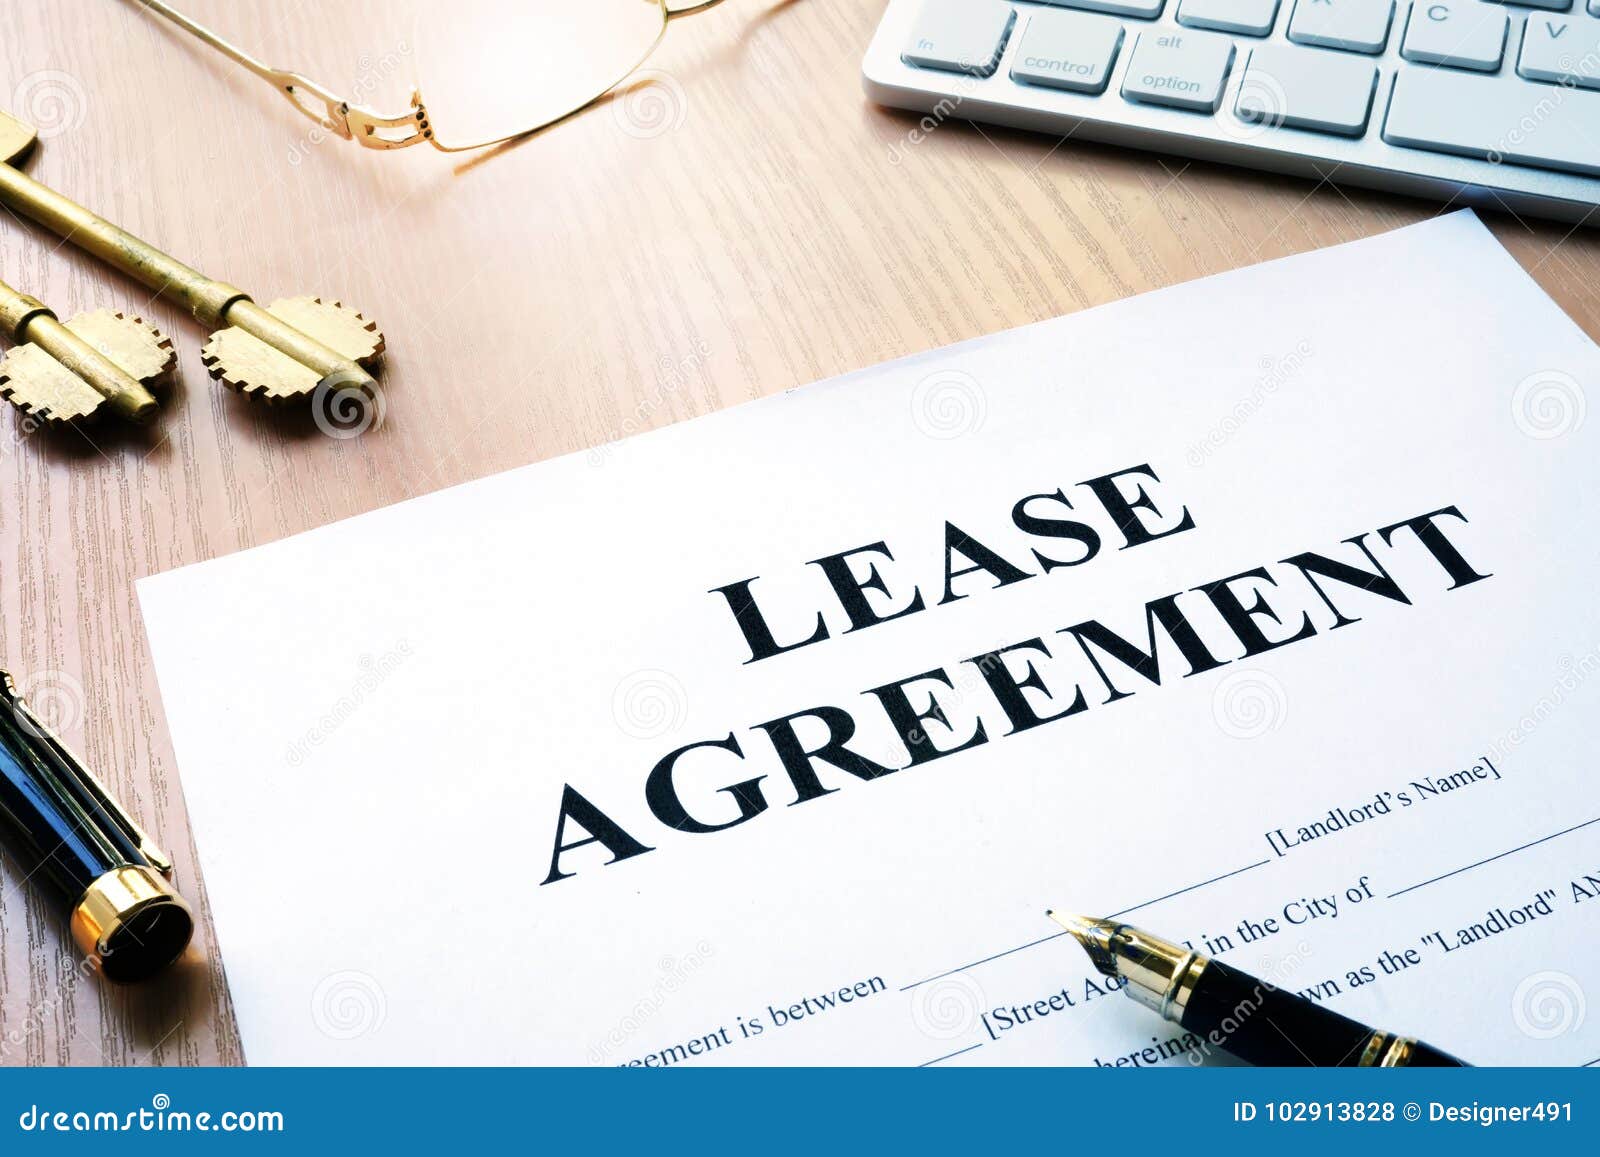 rental lease agreement form.